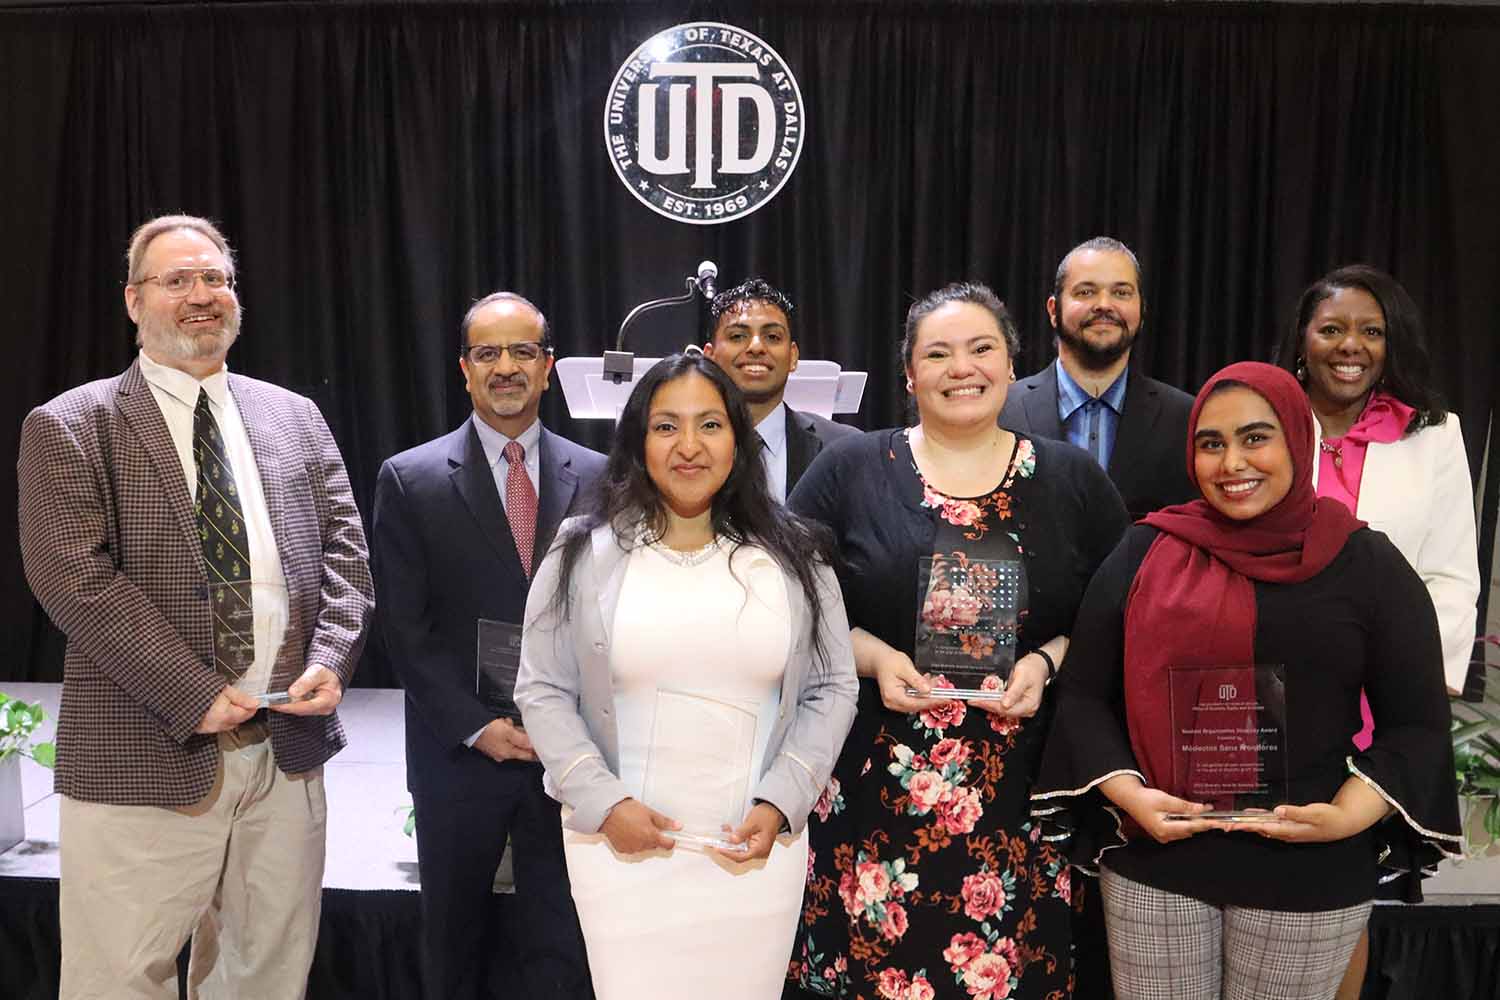 UTD Recognizes Champions of Diversity, Equity, Inclusion at Event